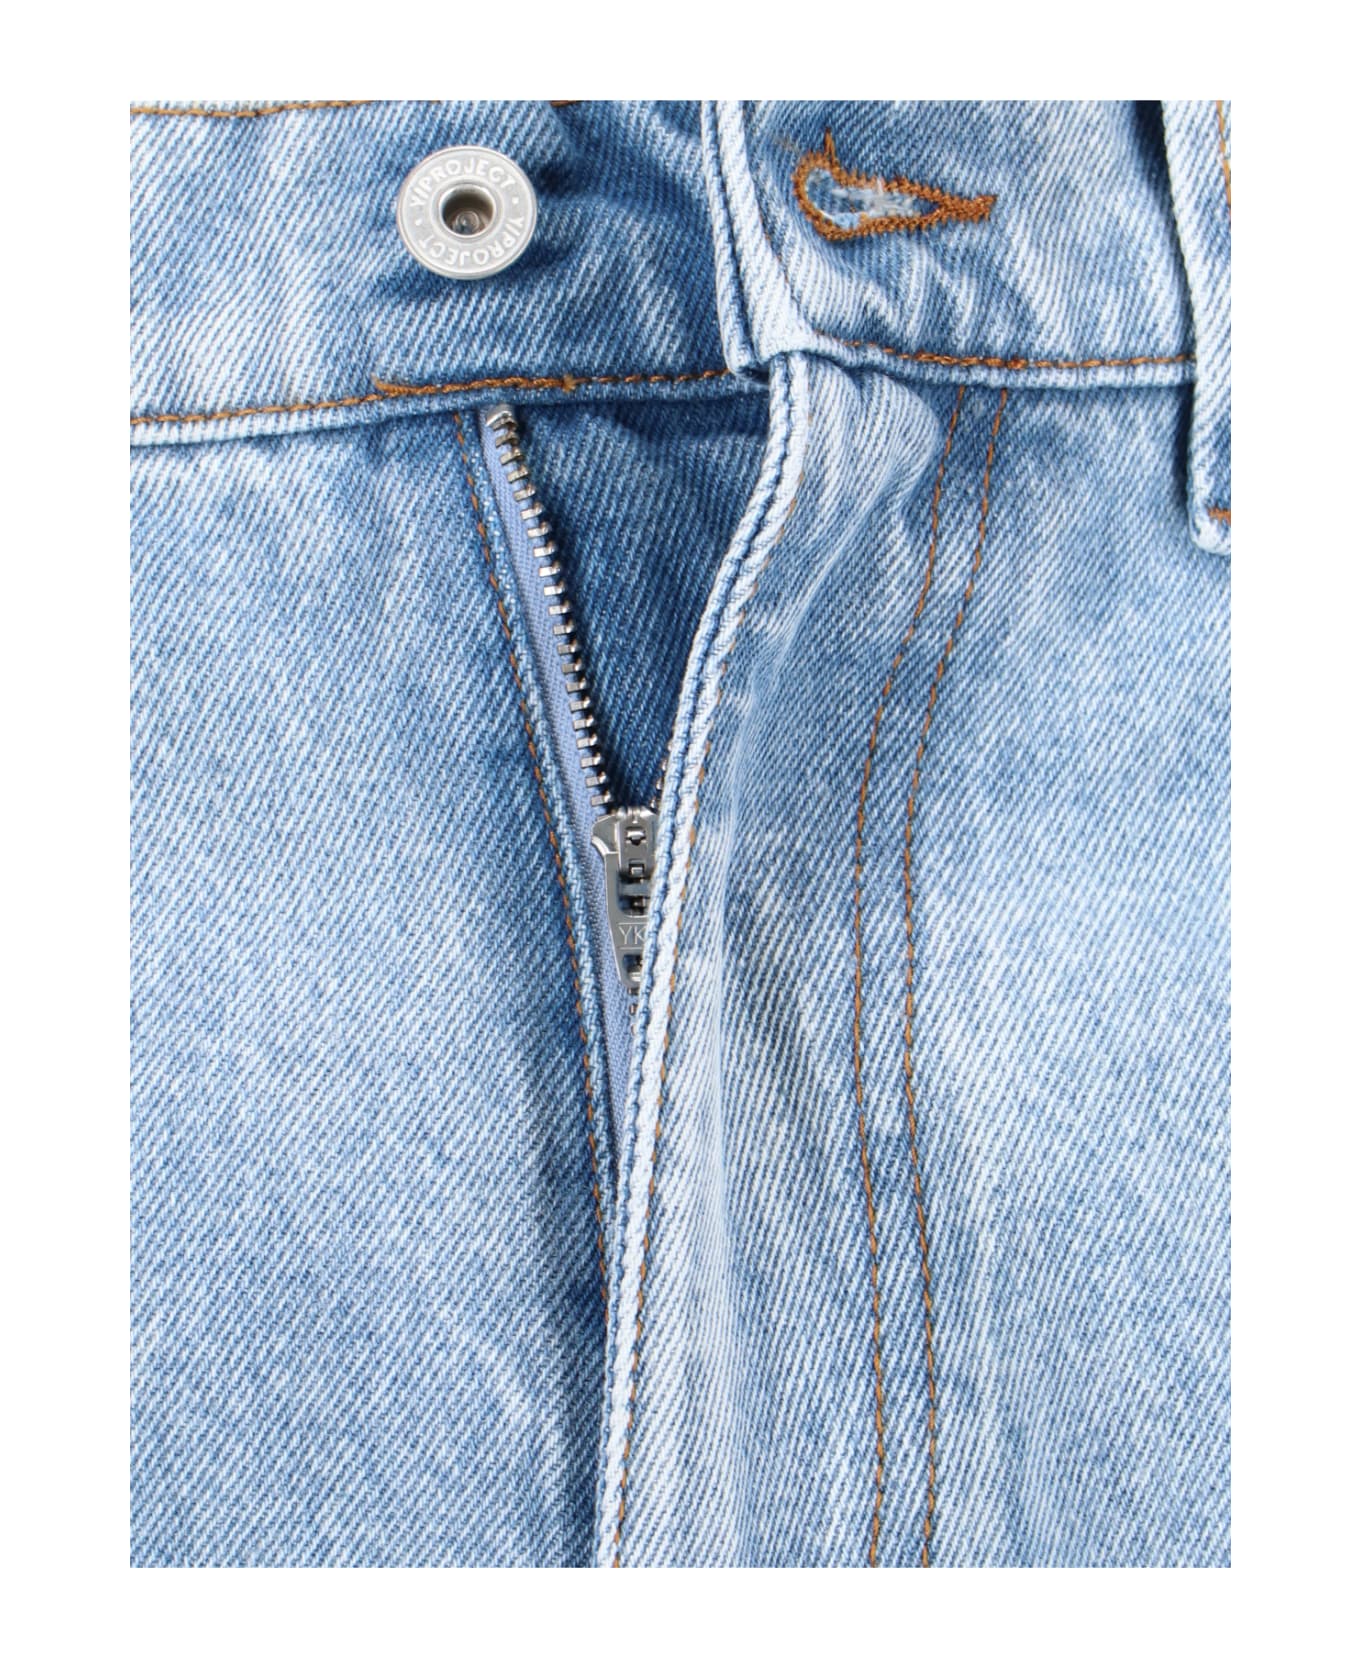 Y/Project Wide Jeans - Light Blue デニム